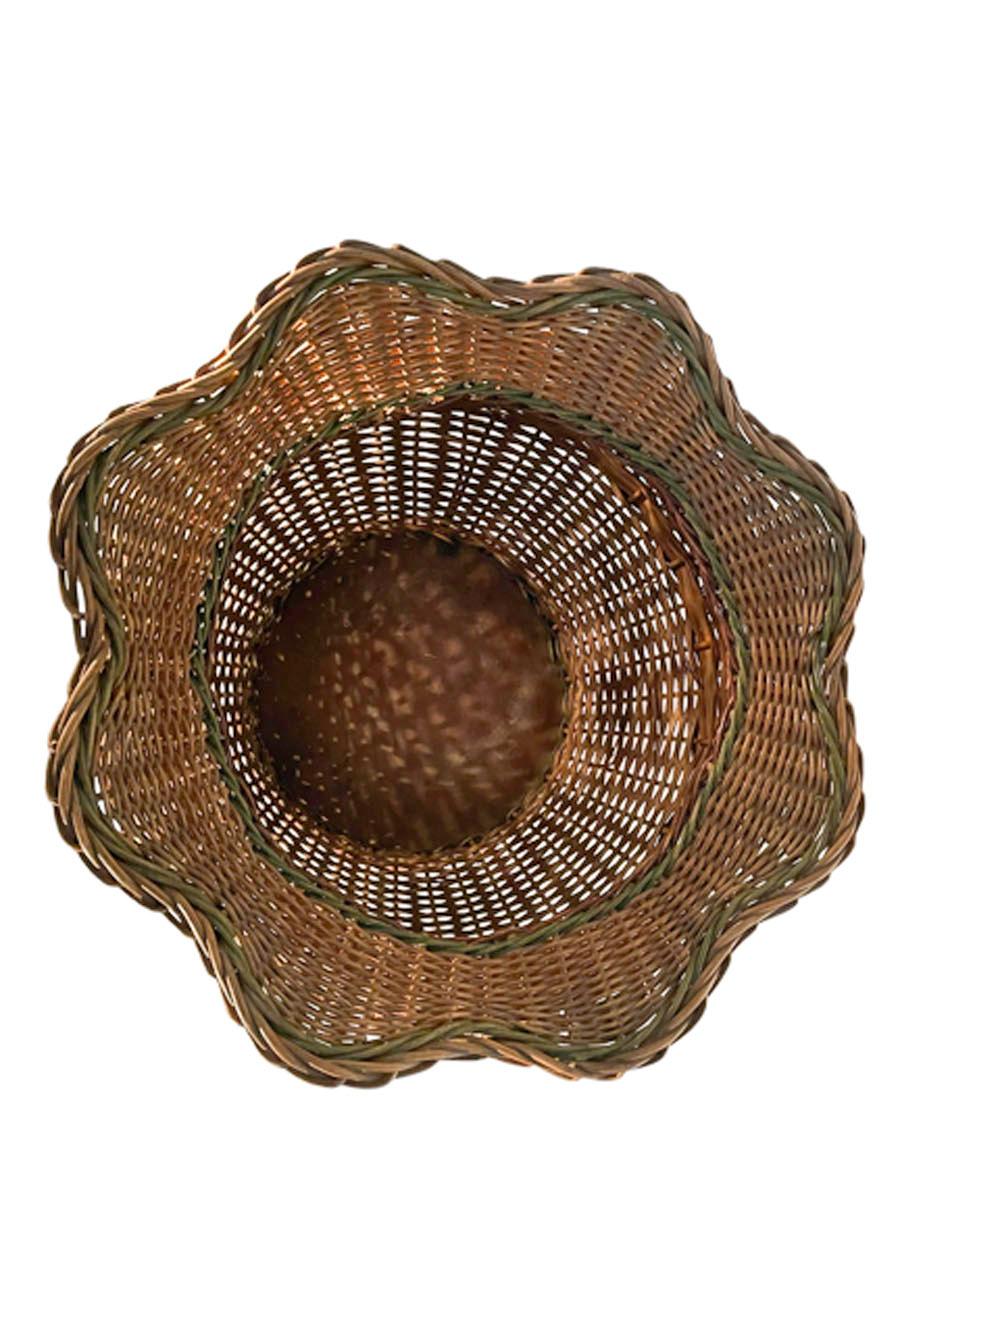 Early 20th Century Wicker Planter / Cachepot with Original Color In Good Condition For Sale In Nantucket, MA